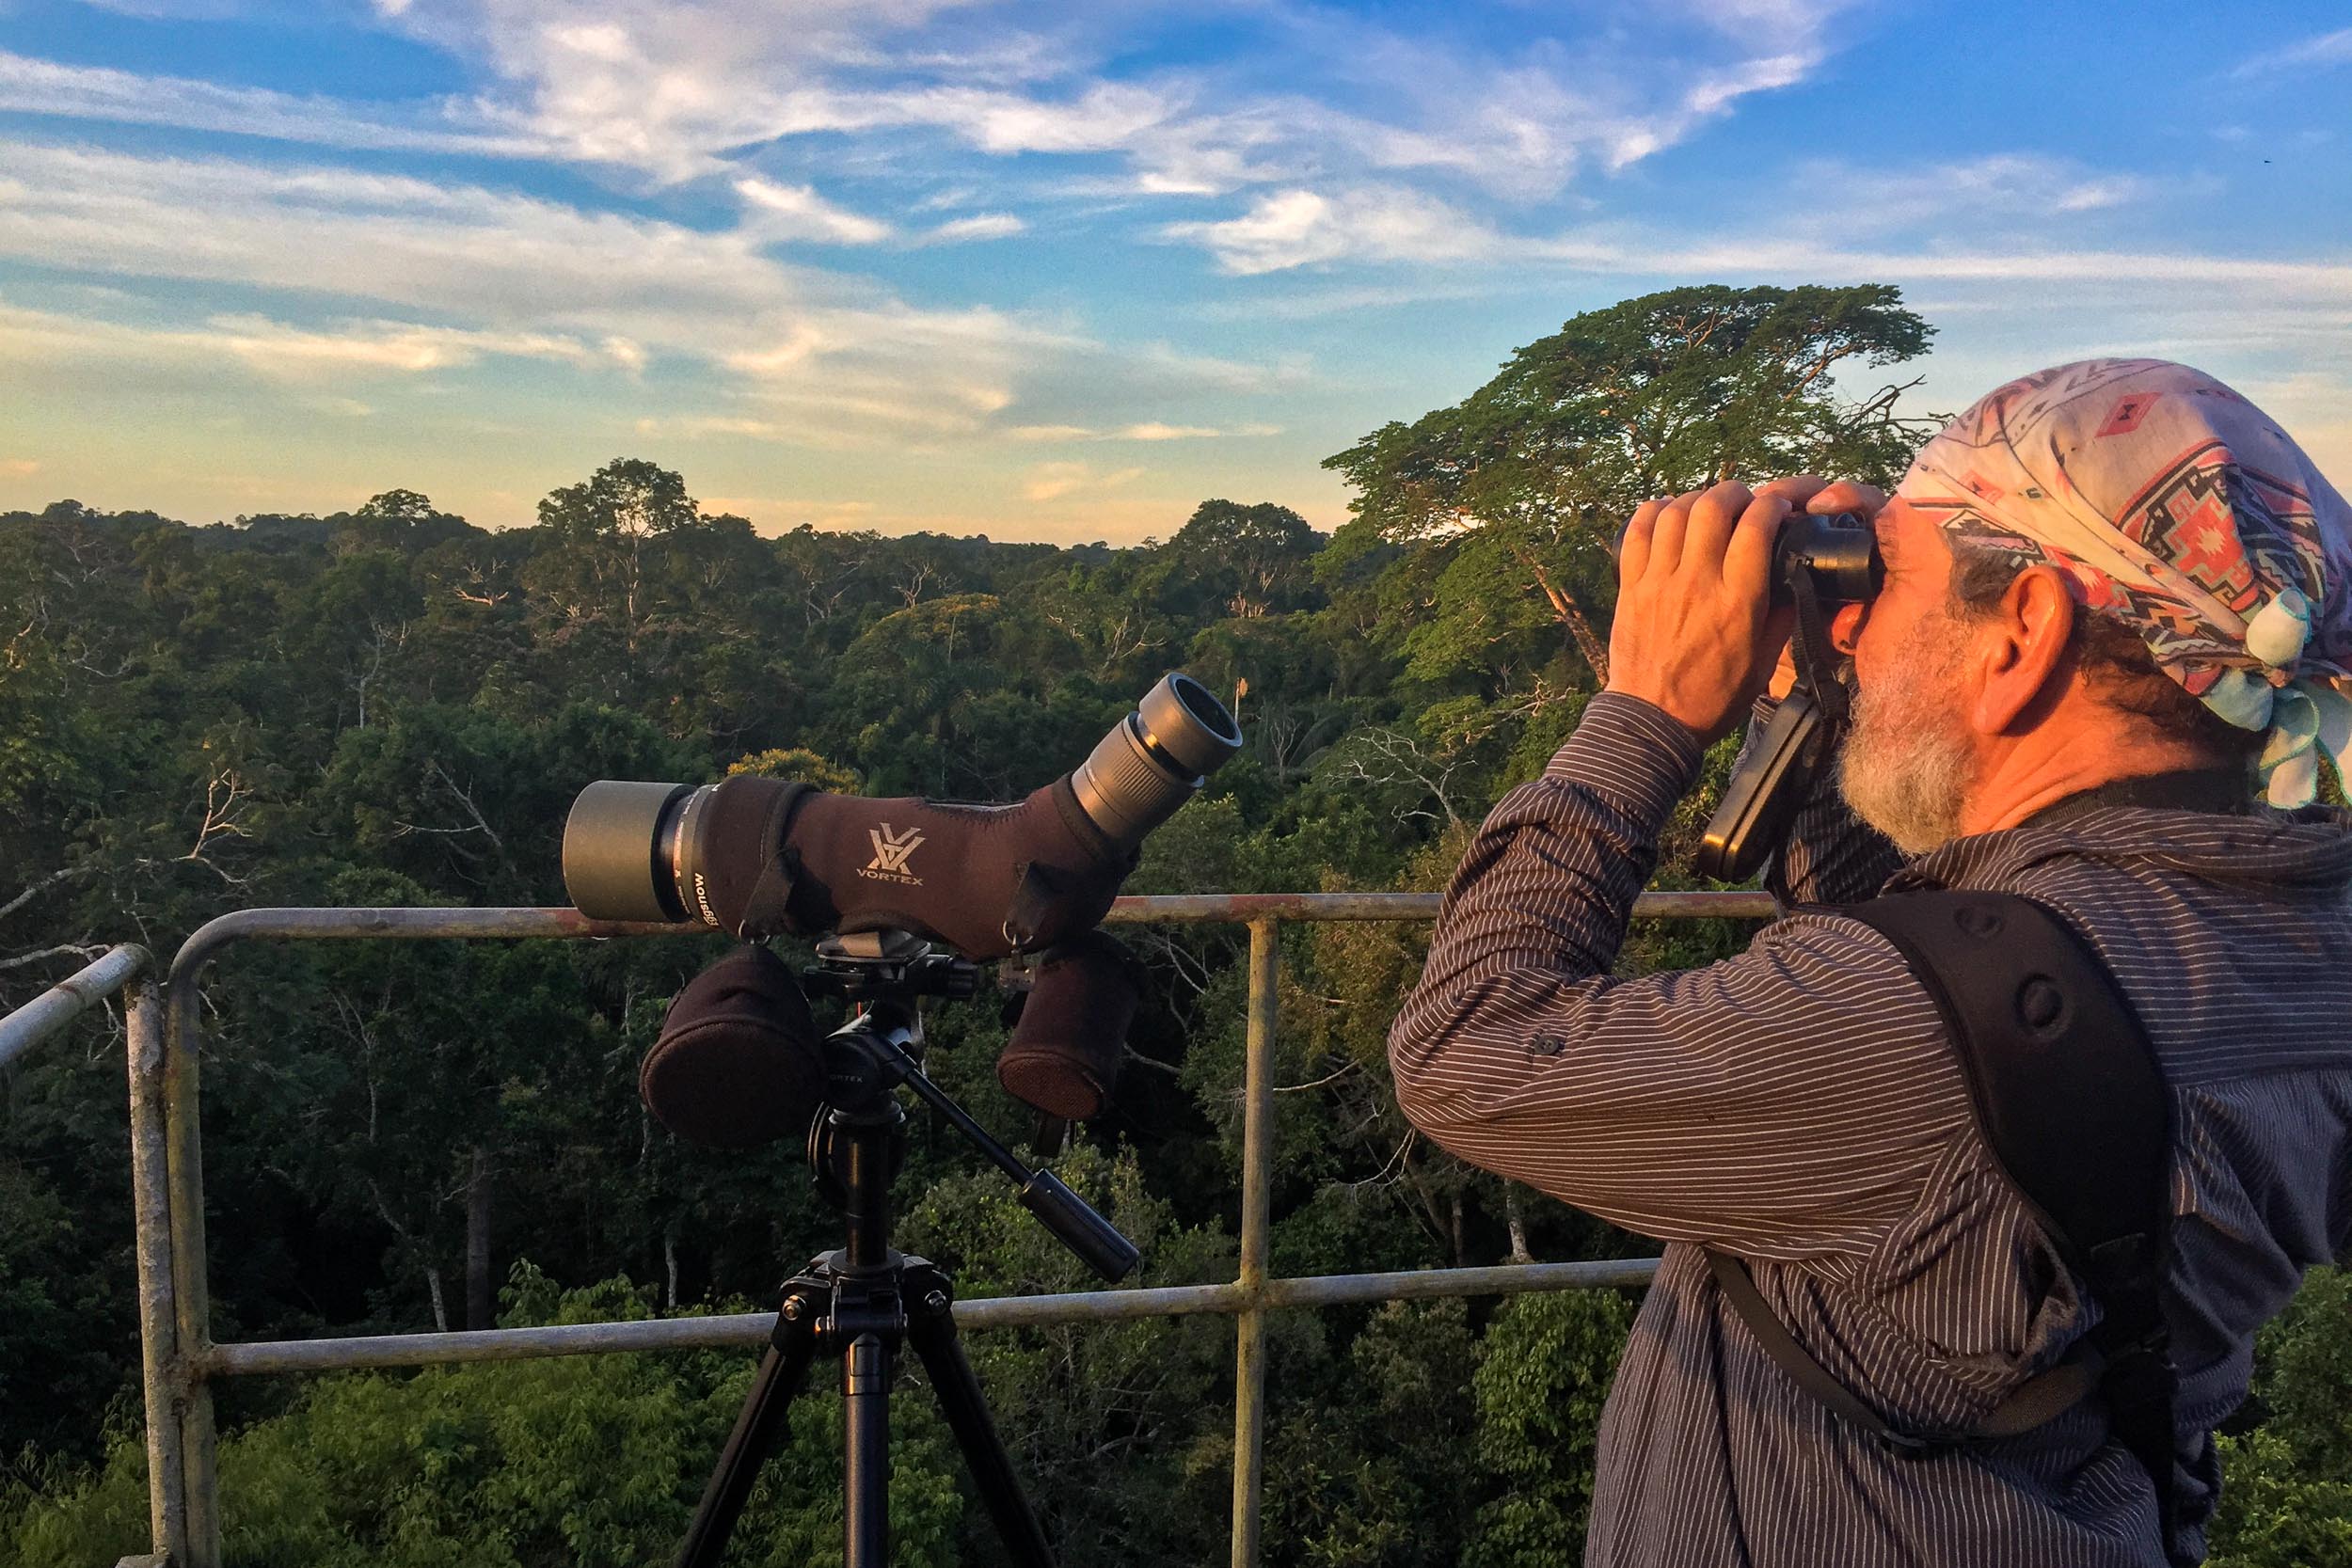 Customize your trip with Birding Experience